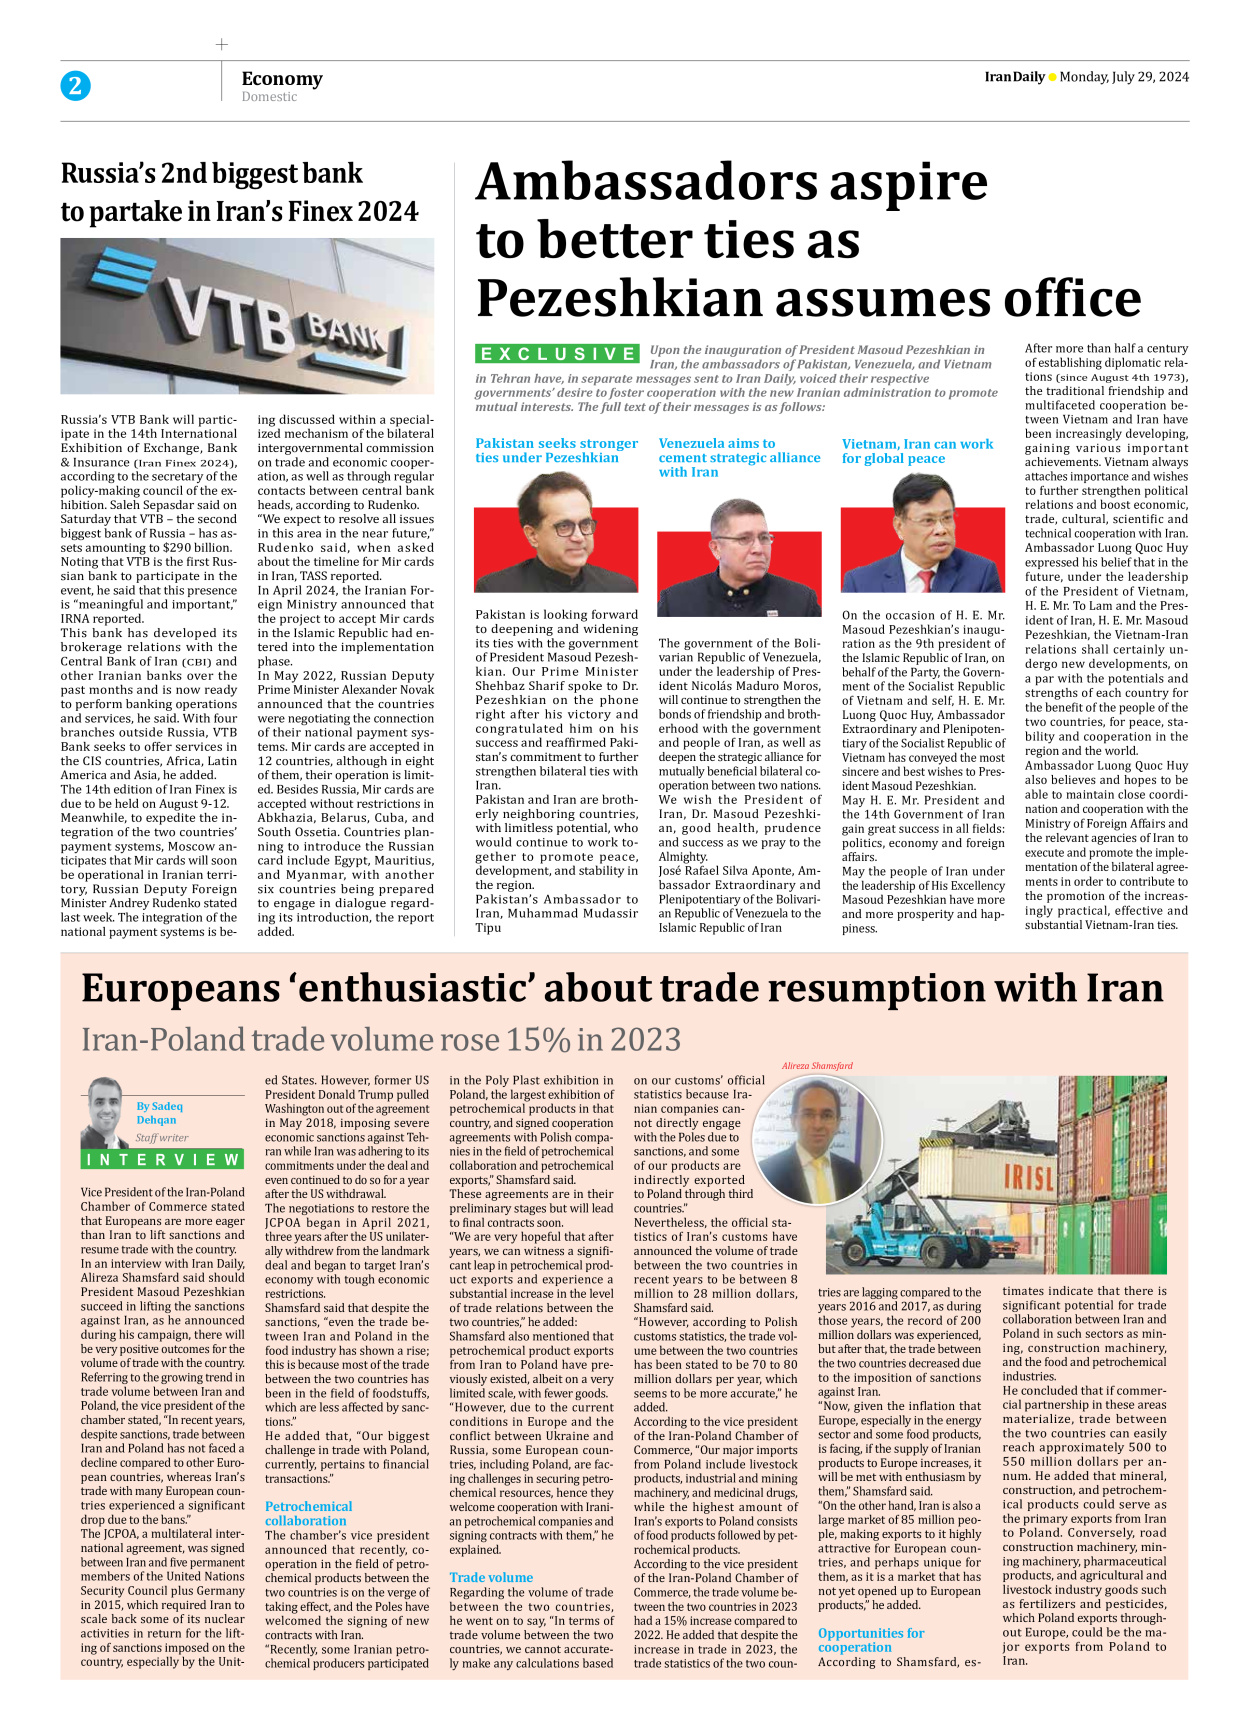 Iran Daily - Number Seven Thousand Six Hundred and Fourteen - 29 July 2024 - Page 2